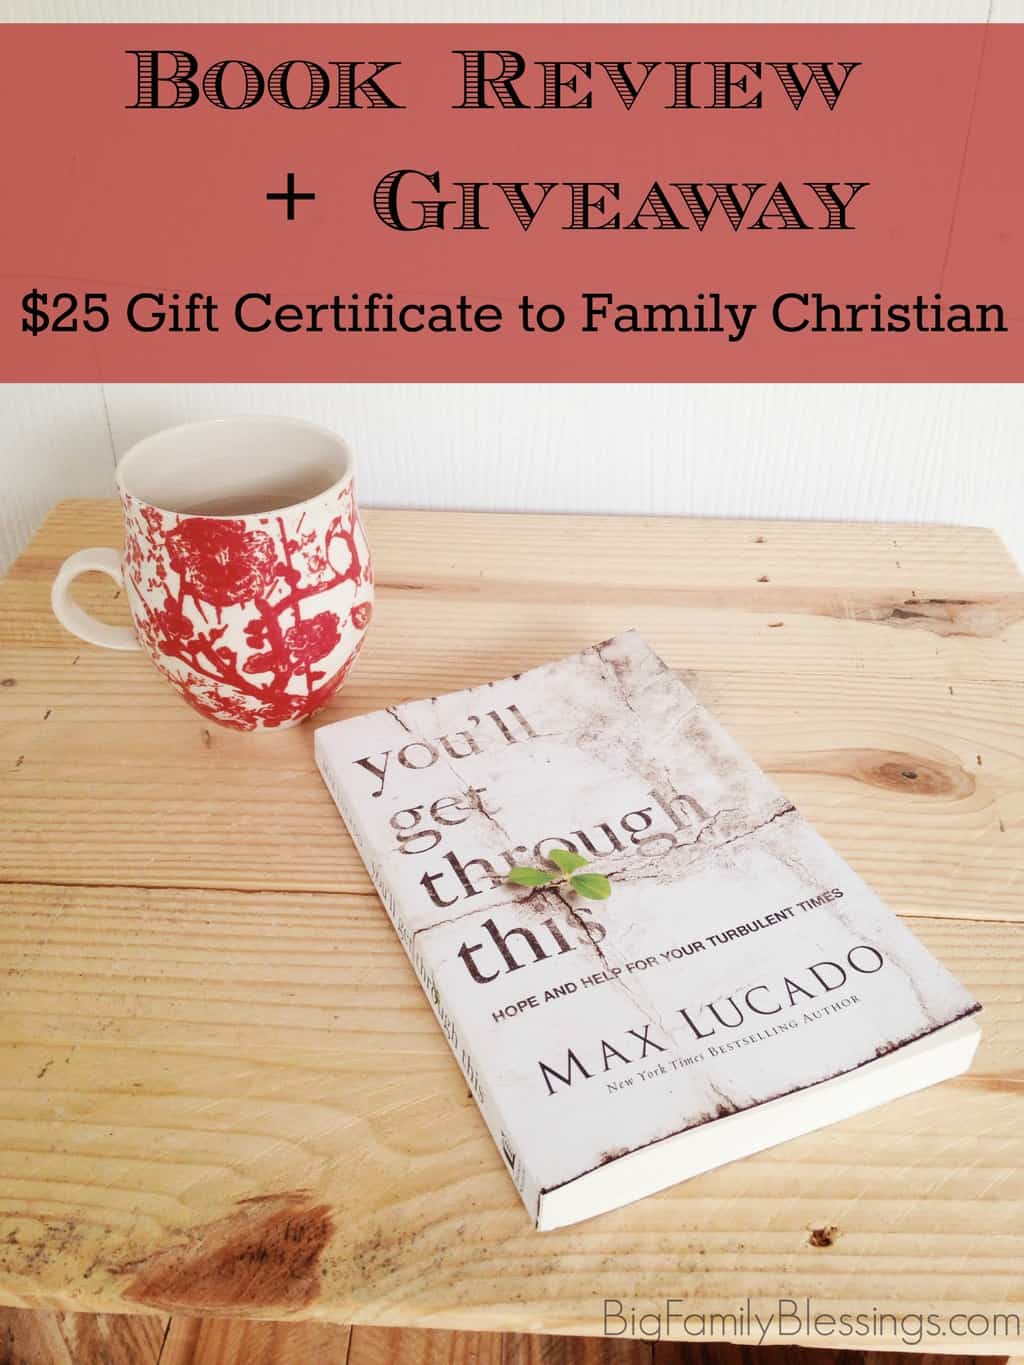 You'll Get Through This: Hope and Help for Your Turbulent Times by Max Lucado book review, plus enter to win $25 gift certificate to Family Christian. The book chronicles Joseph's life- following along as time after time he walks through unthinkable hardships, yet he survived...better yet he thrived! God redeems Joseph's mess and he can redeem yours too!